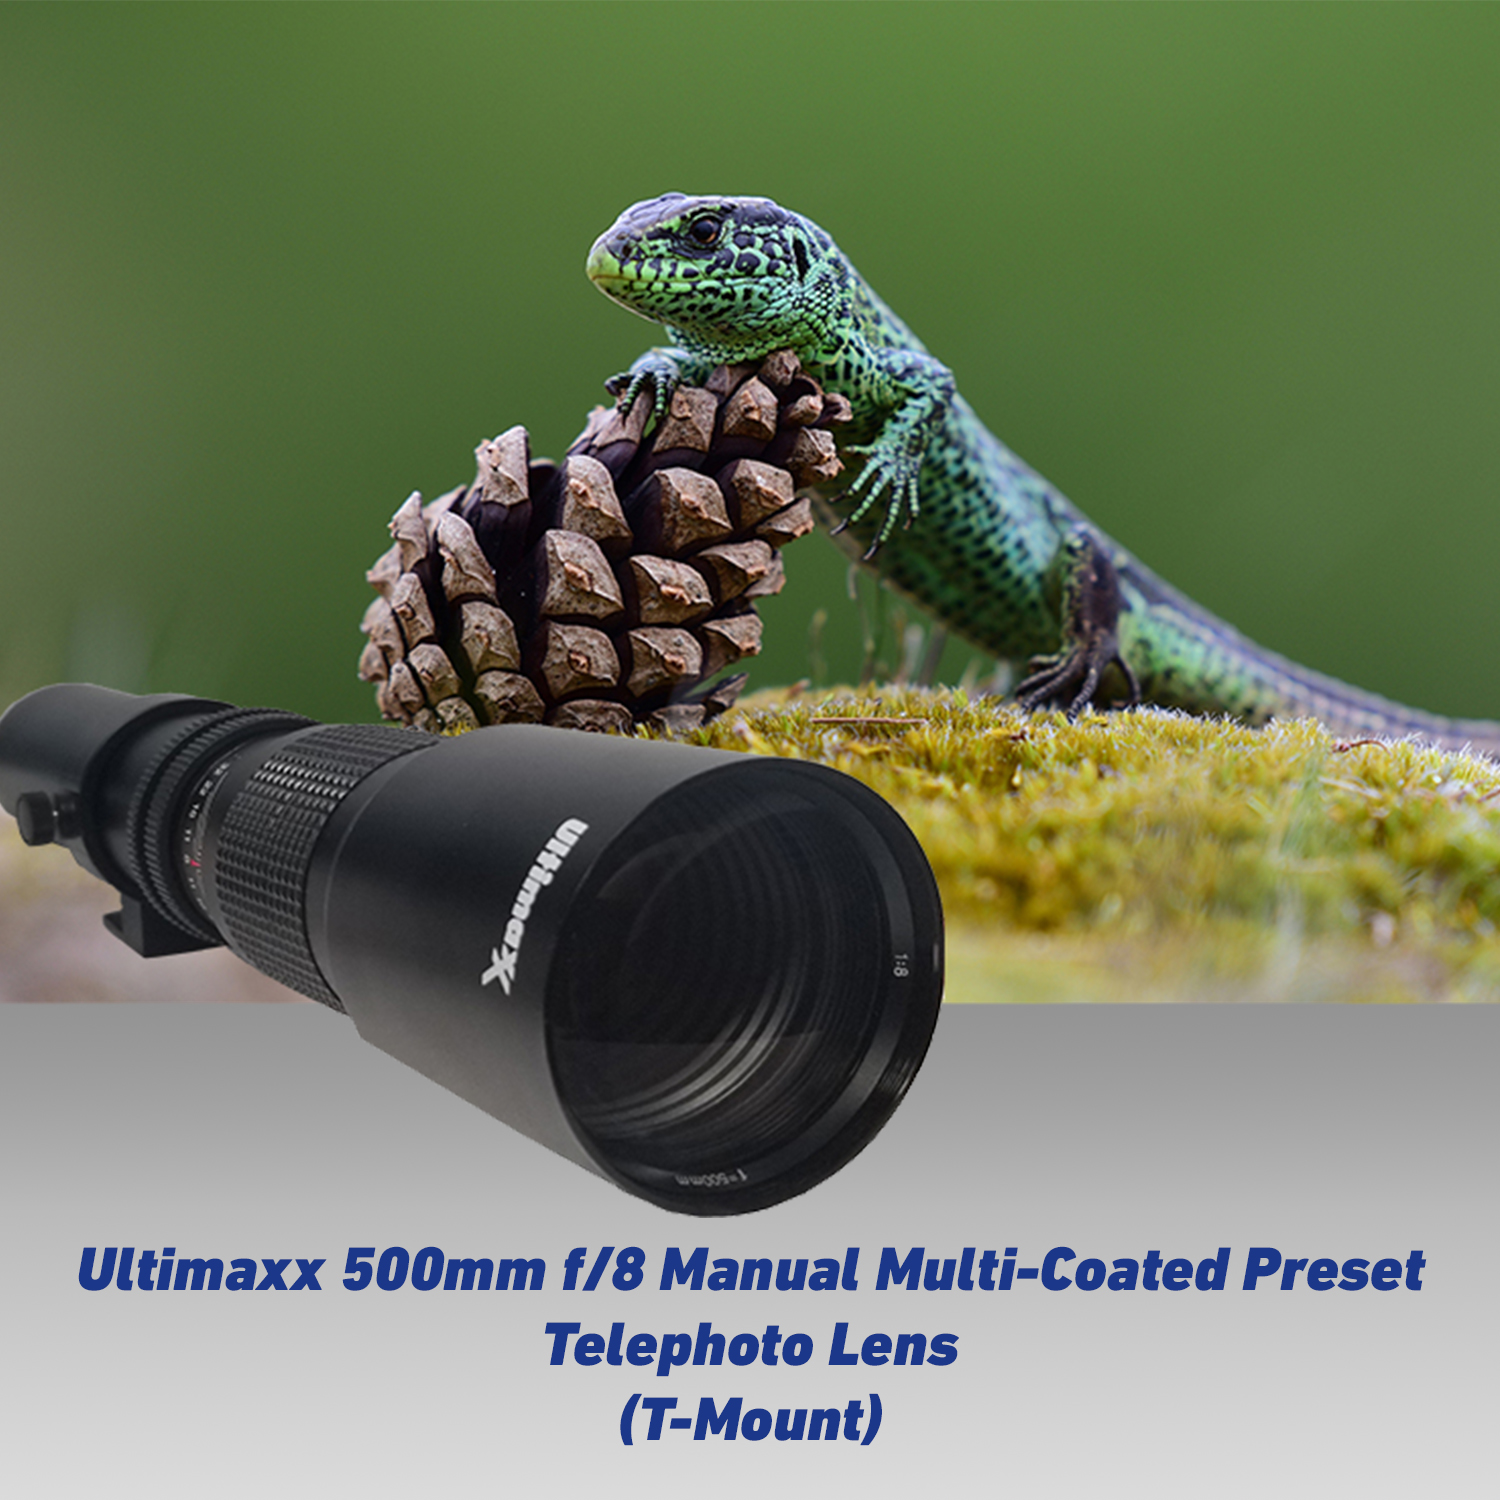 Ultimaxx 500mm f/8 Preset Telephoto Lens for Nikon Z7 Z7II Z6 Z6II Z5 Z50 Mirrorless Camera & Other Z-Mount Cameras with Basic Accessory Bundle - Includes: 2x Converter for T-Mount Lenses & More - image 3 of 6